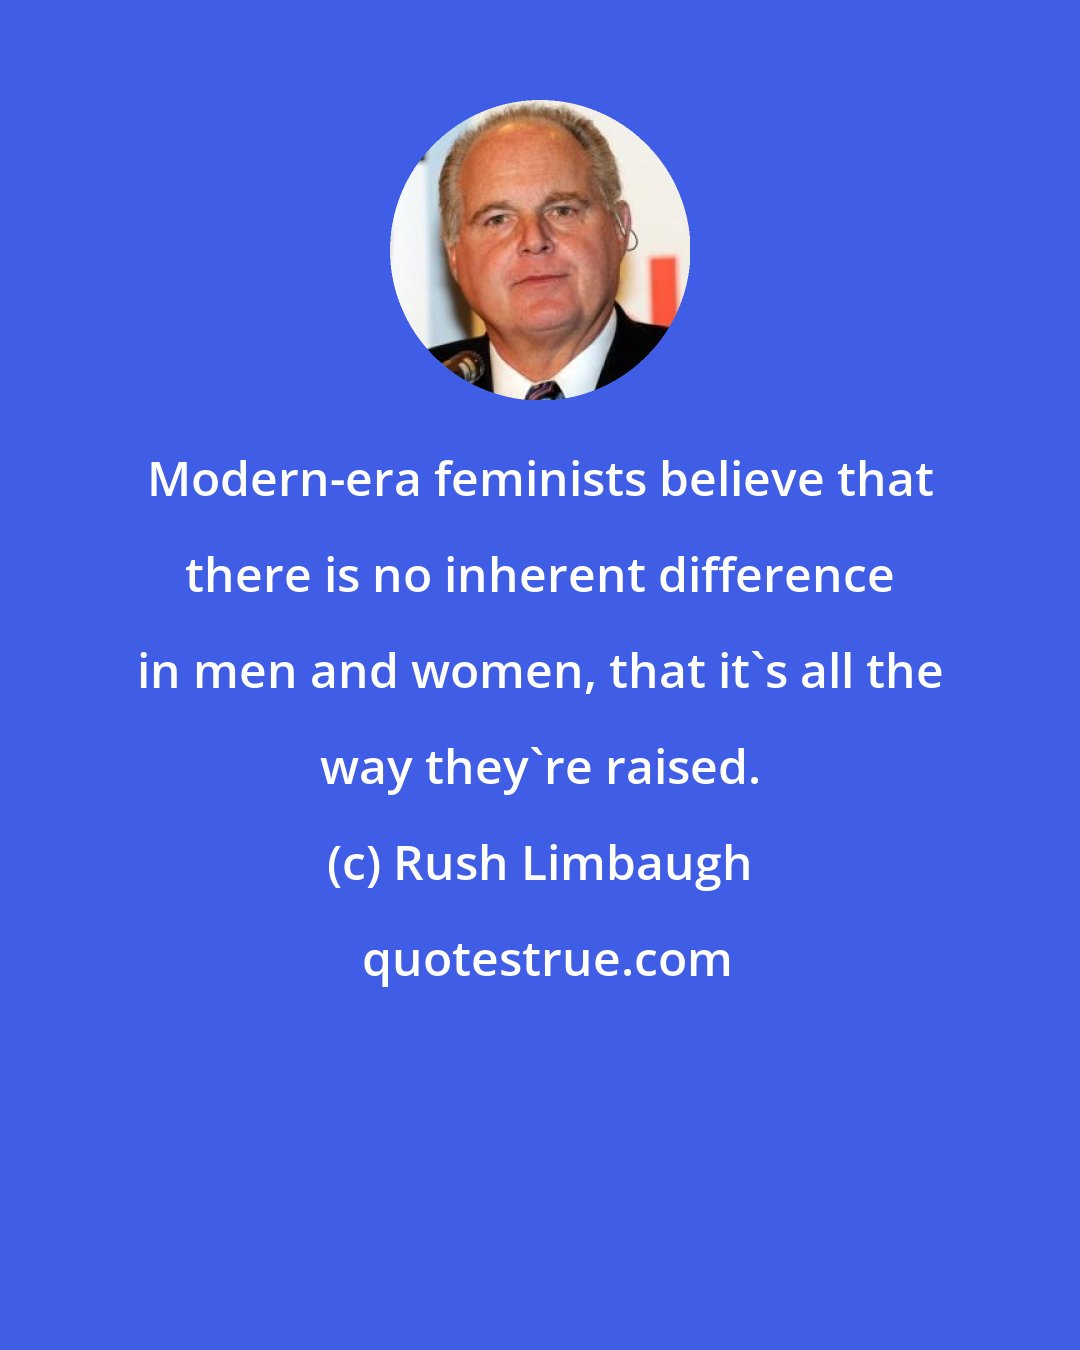 Rush Limbaugh: Modern-era feminists believe that there is no inherent difference in men and women, that it's all the way they're raised.